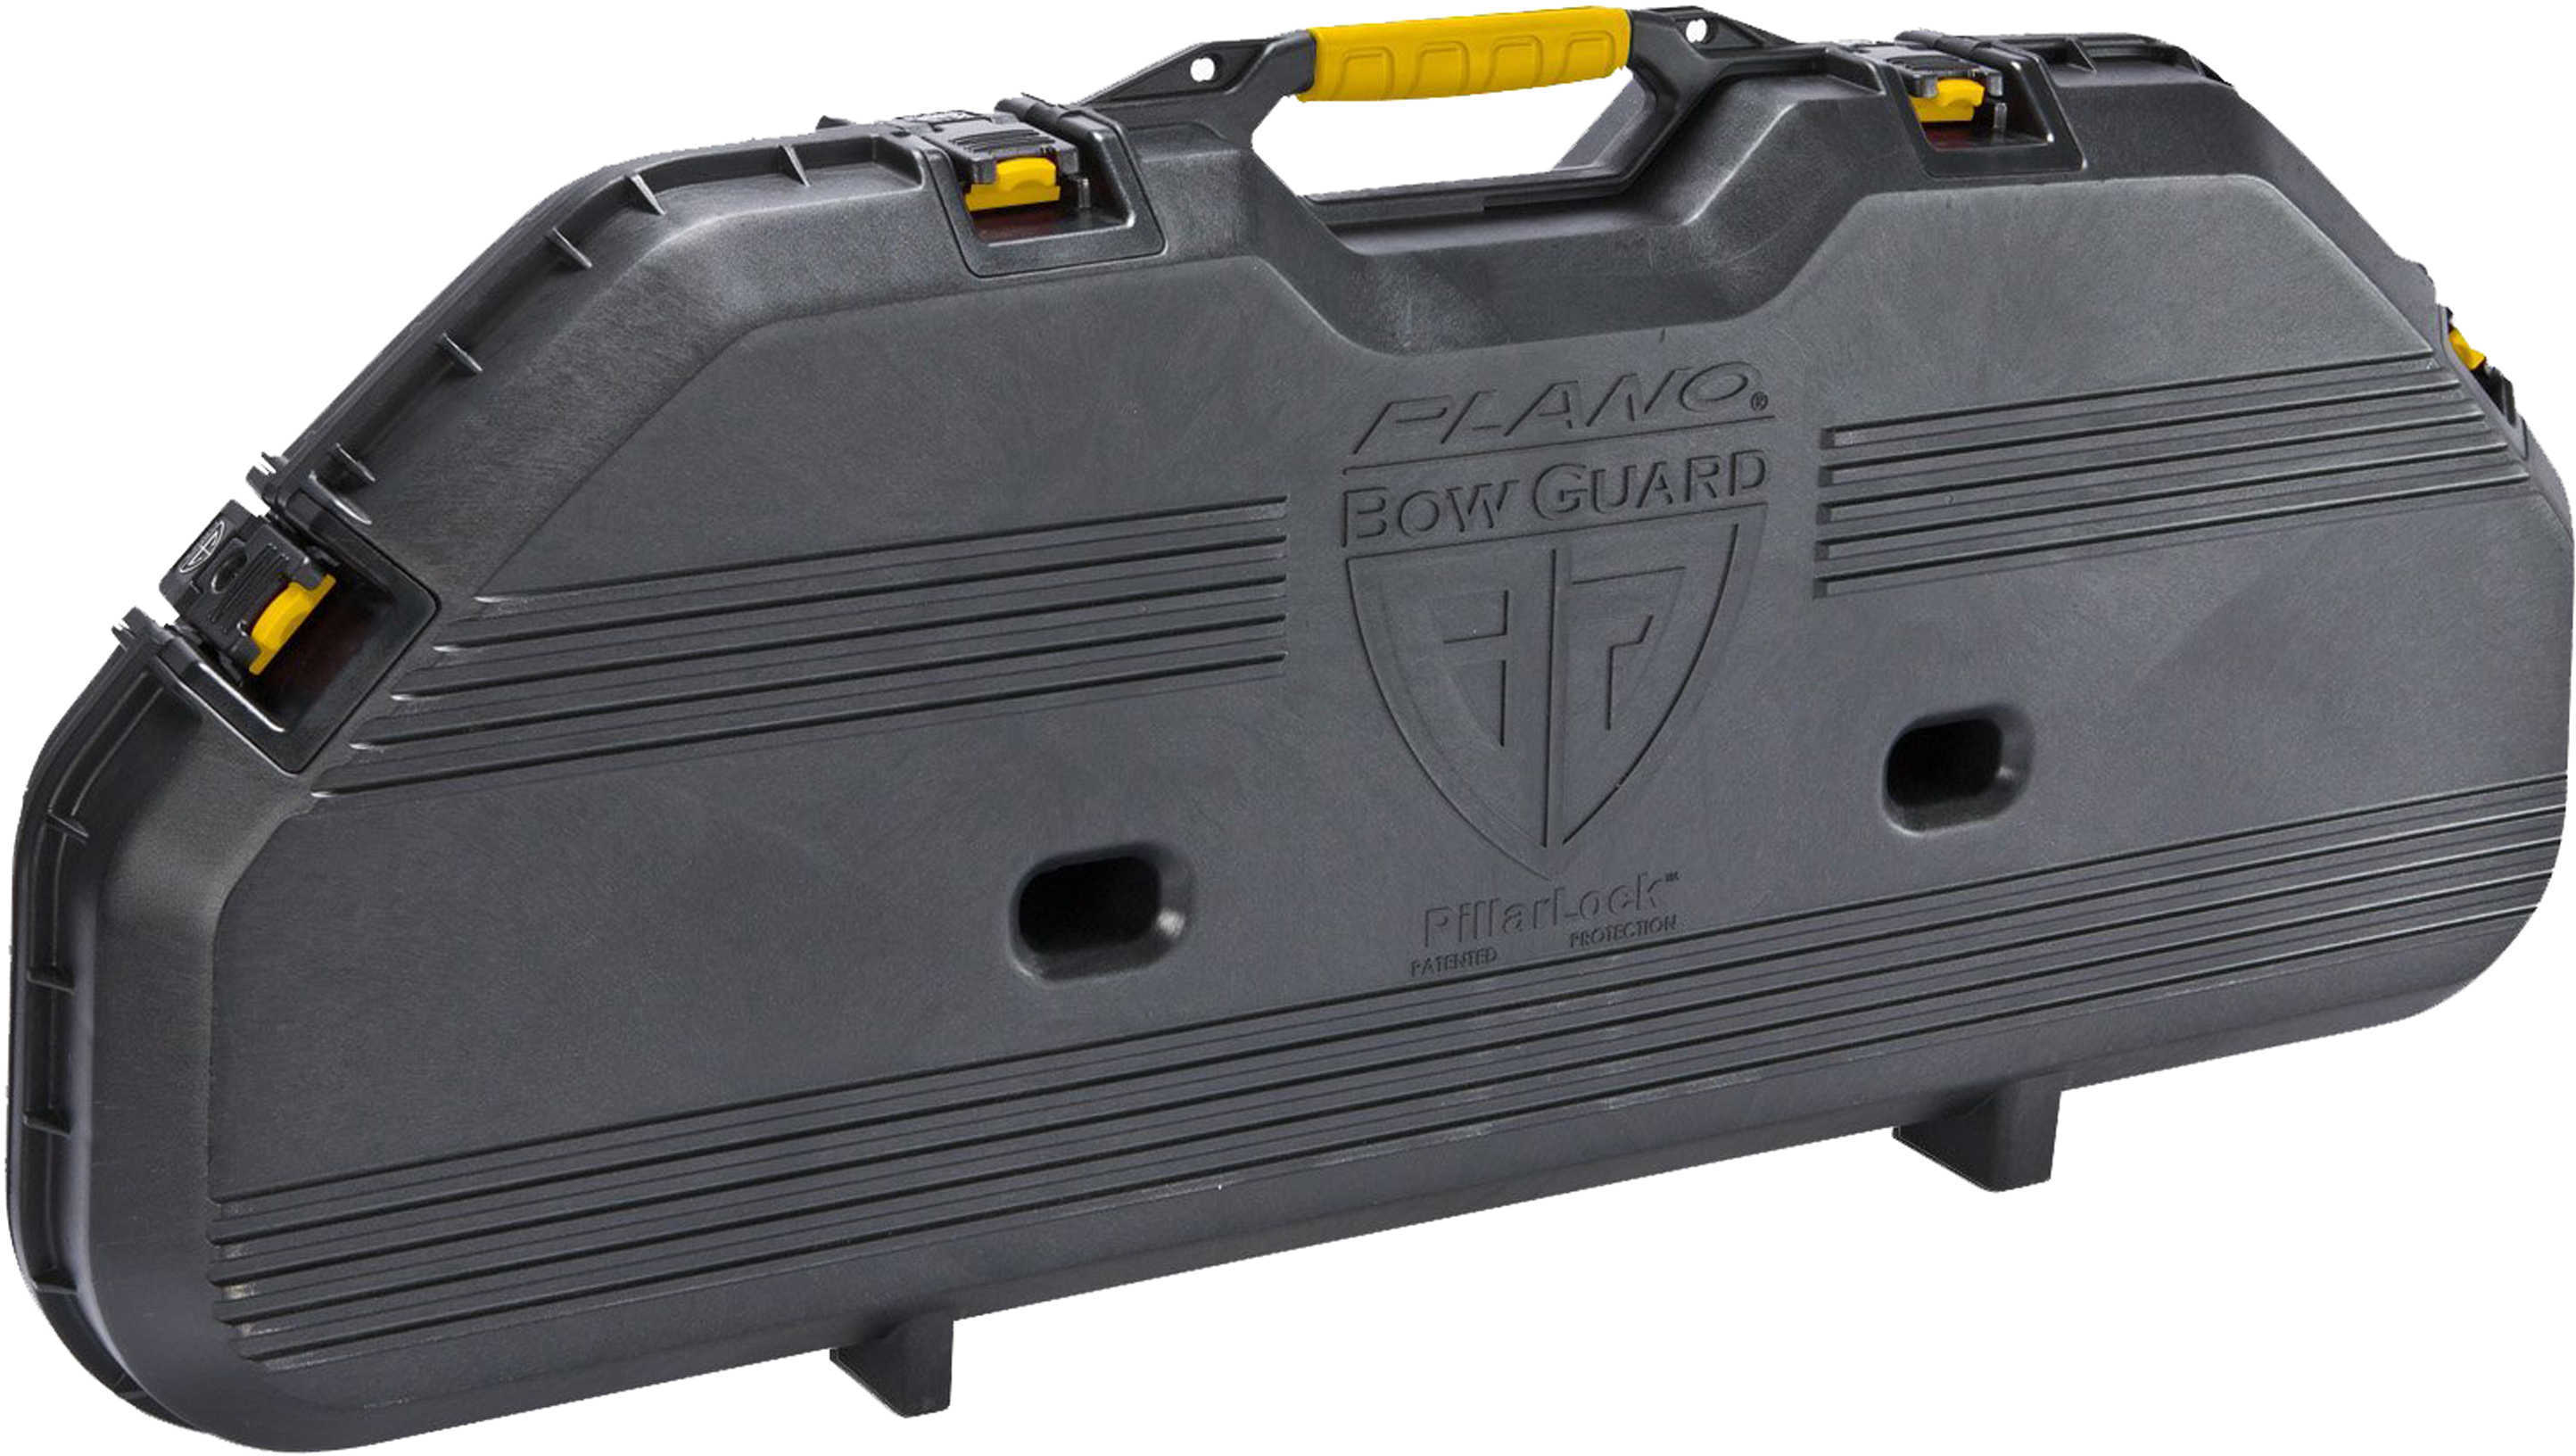 Plano All Weather Bow Case Black Model: 108115